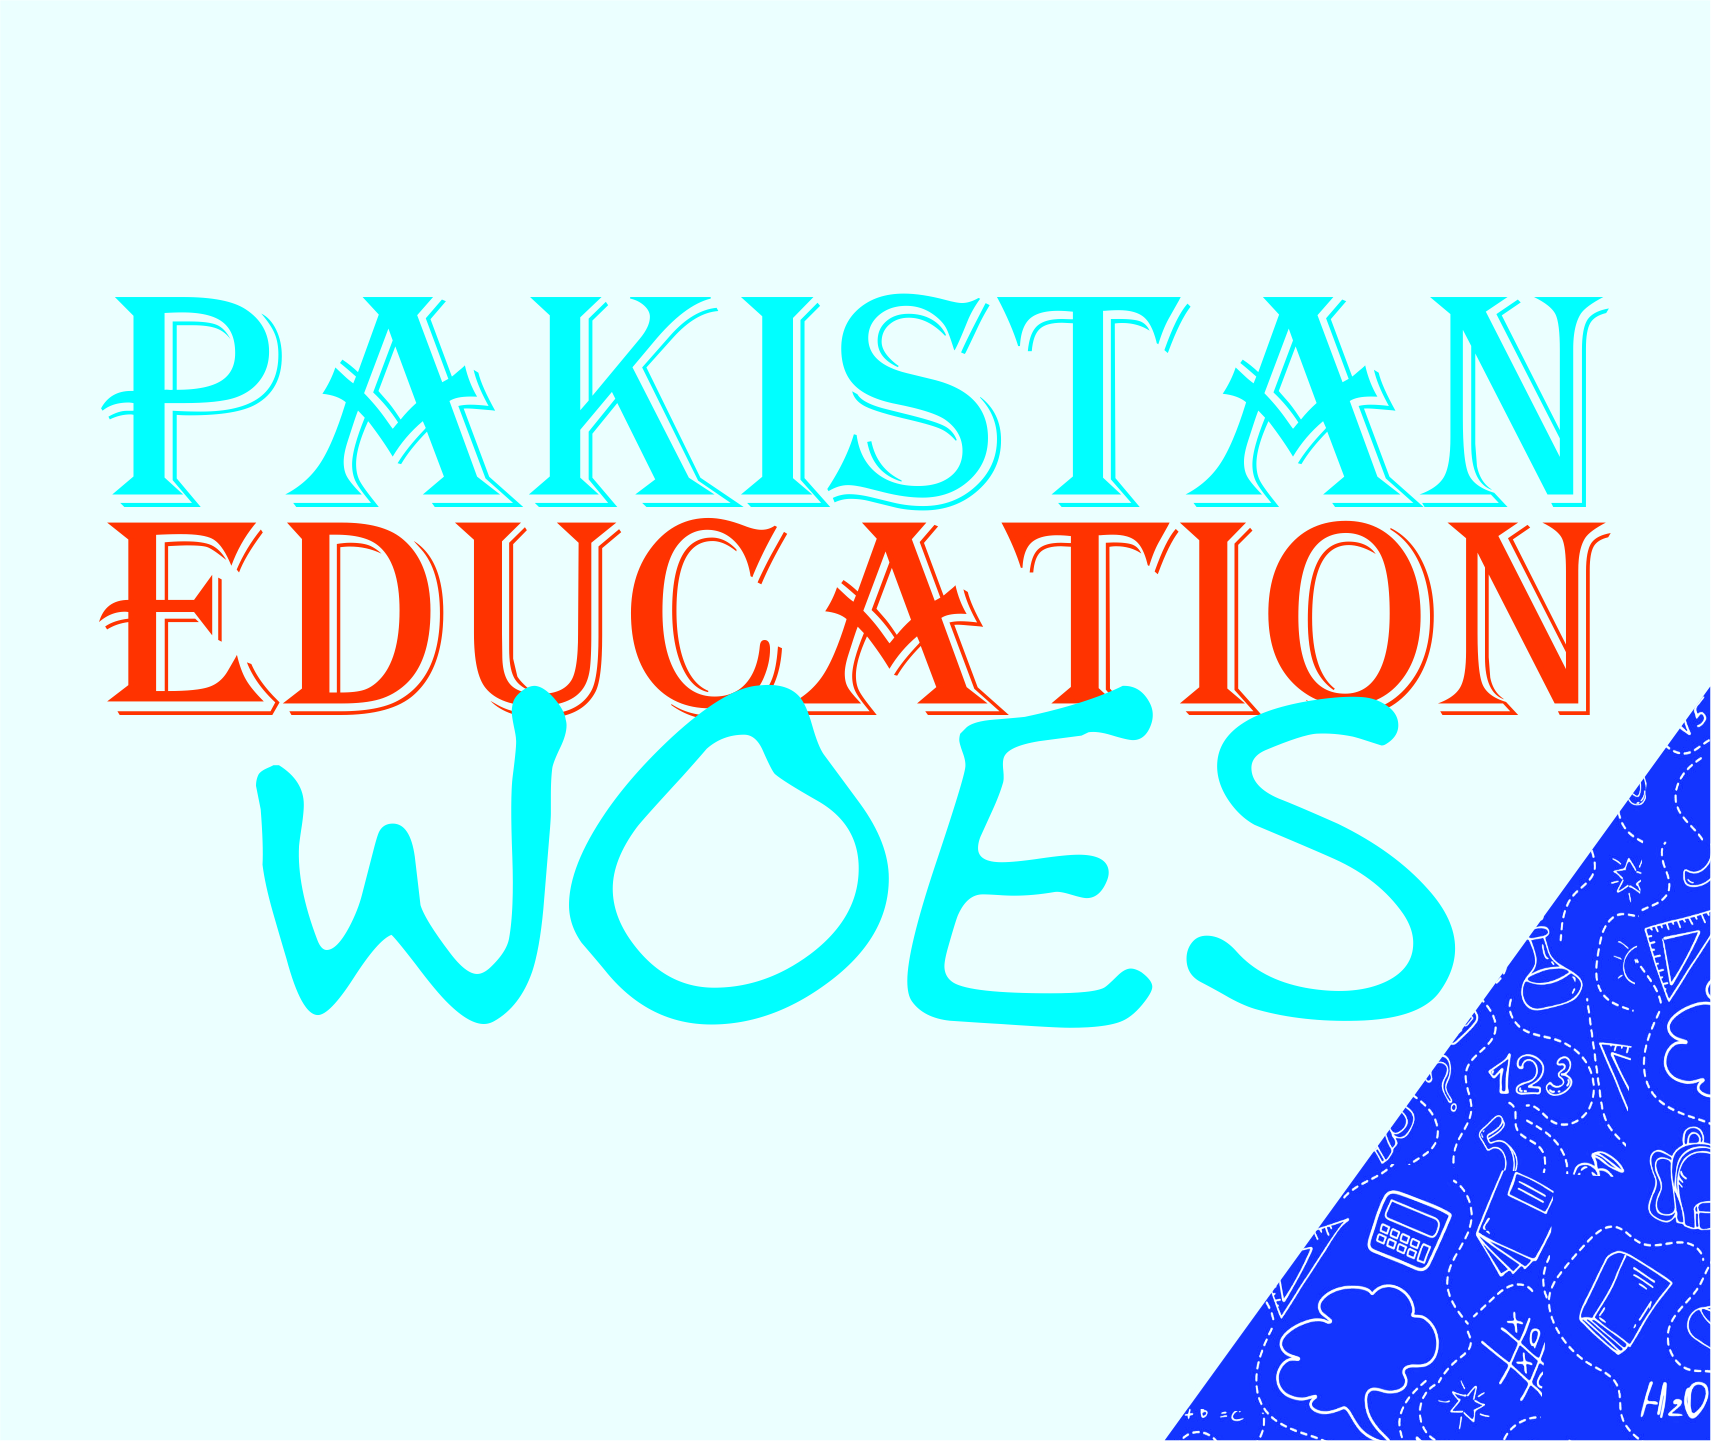 You are currently viewing Pakistan Education Woes